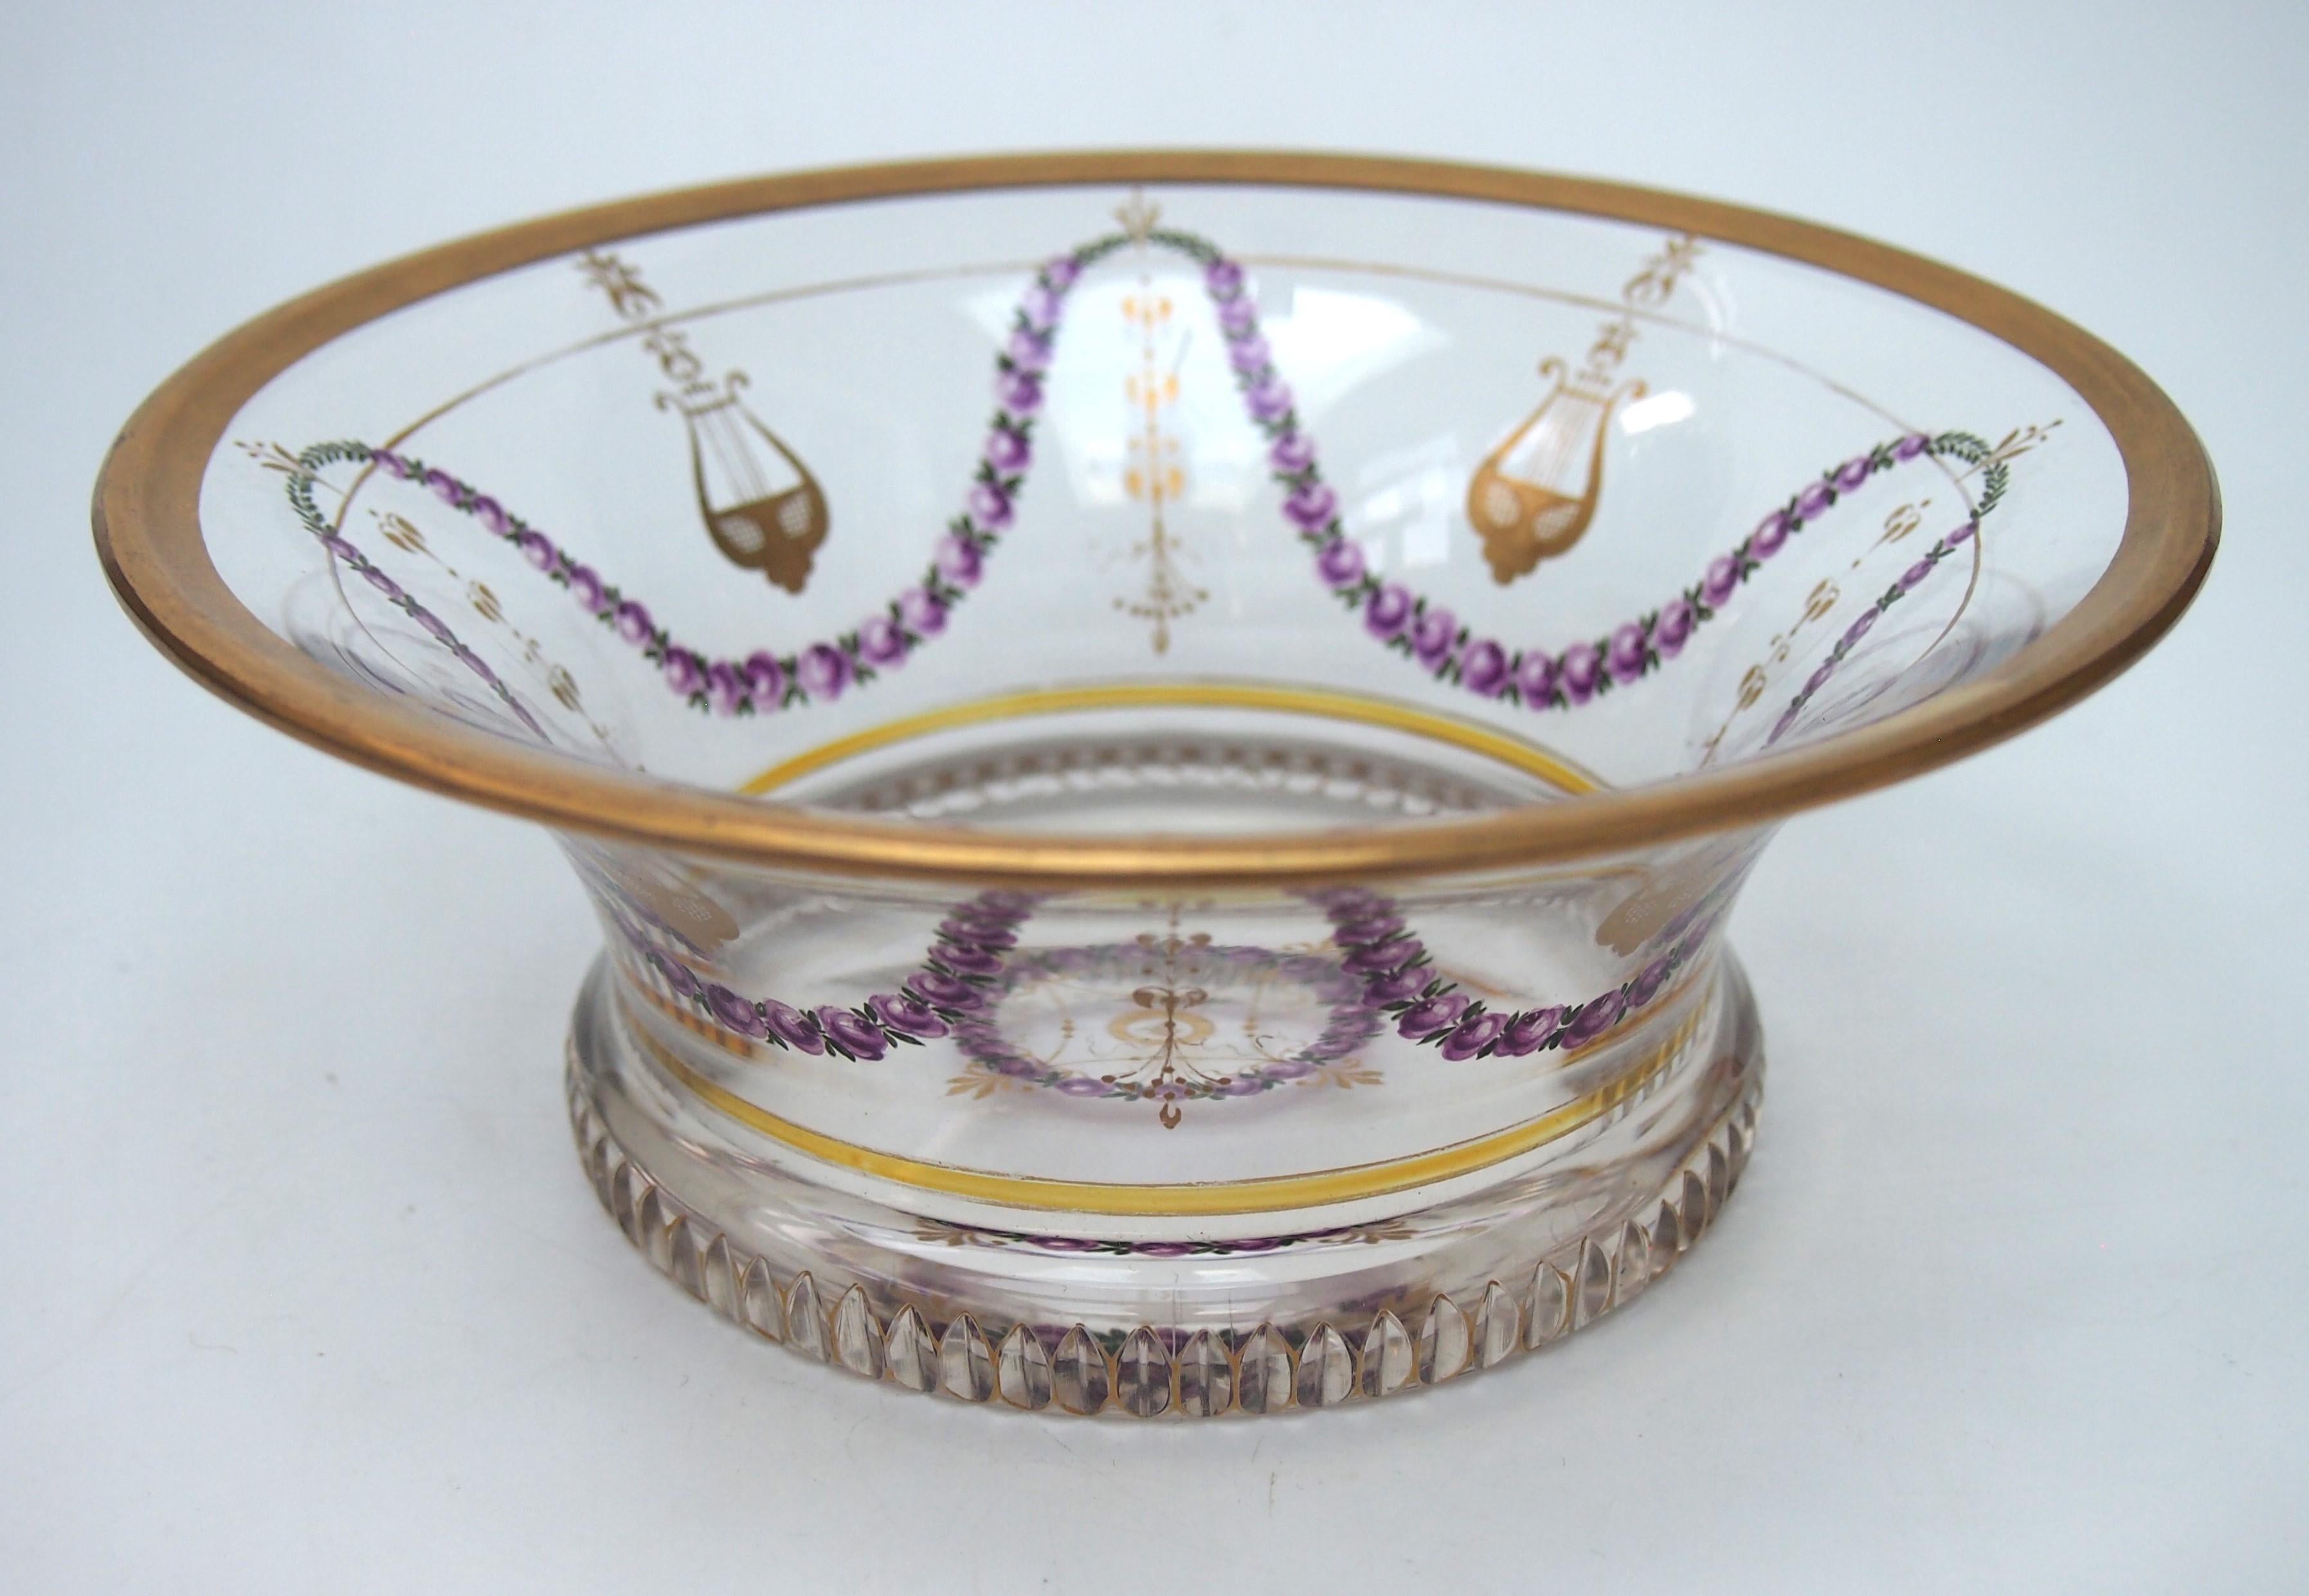 Fabulous and rare Empire Revival glass bowl by J & L Lobmeyr c1875. Enamelled and gilded with fronds of flowers and classical imagery with an unusual cog wheel base - nicely signed to the centre in gold with the Lobmeyr logo (see images) -probably